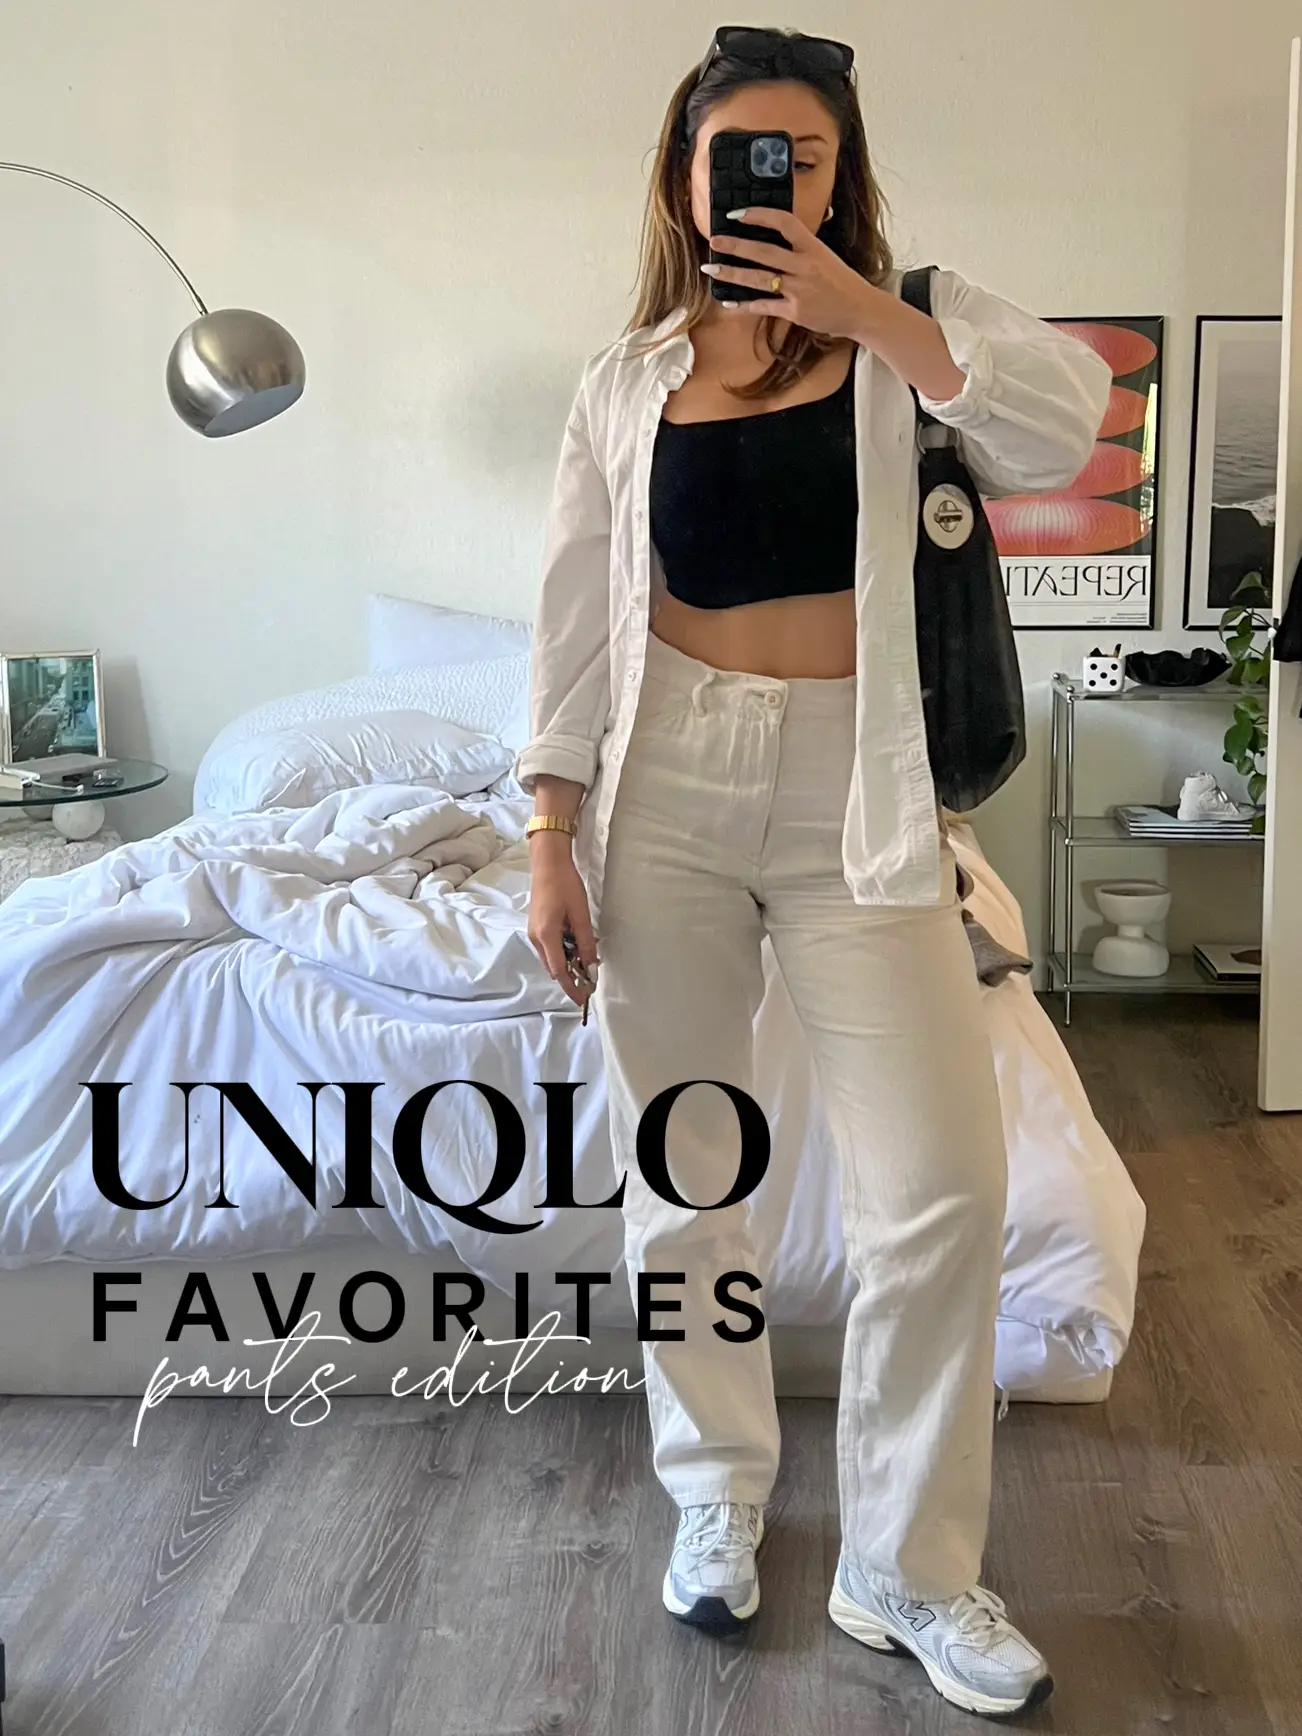 Trying on the uniqo bra top! I love a basic staple 🥰 #uniqlo